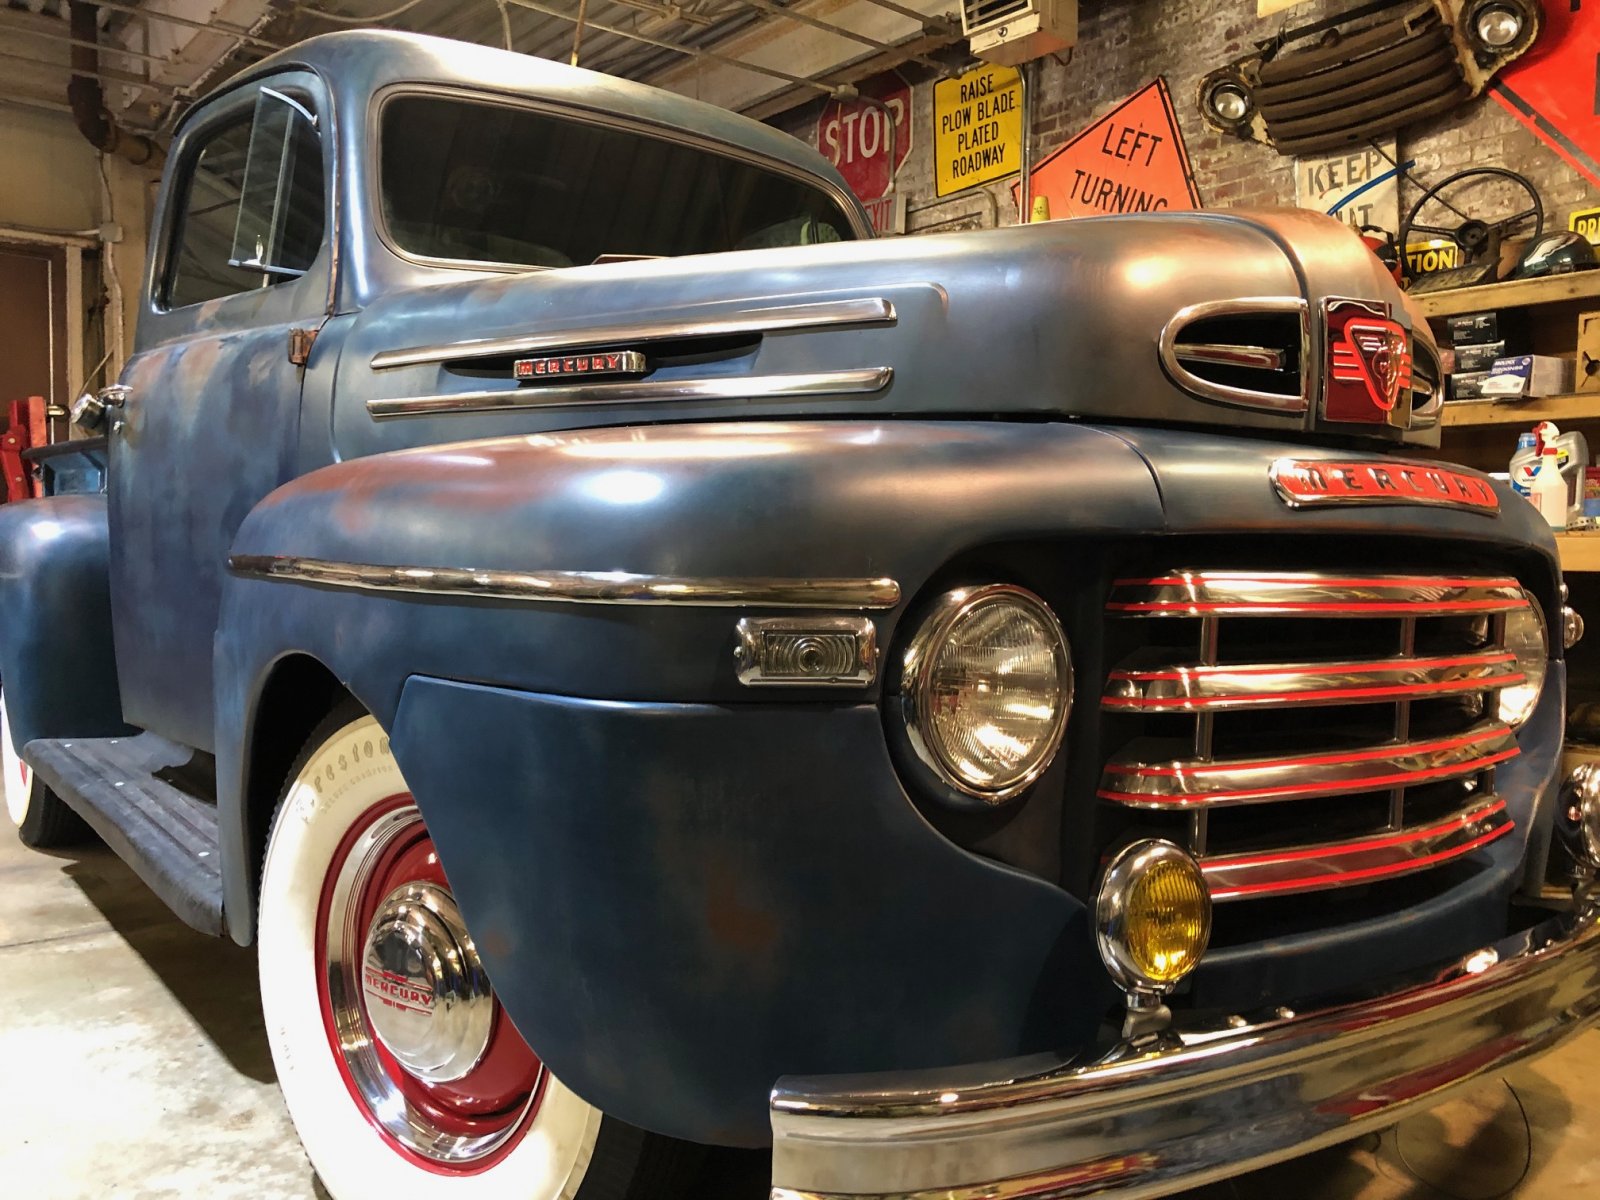 1949 Ford Mercury M47 Built From The Ground Up | Ford Daily Trucks